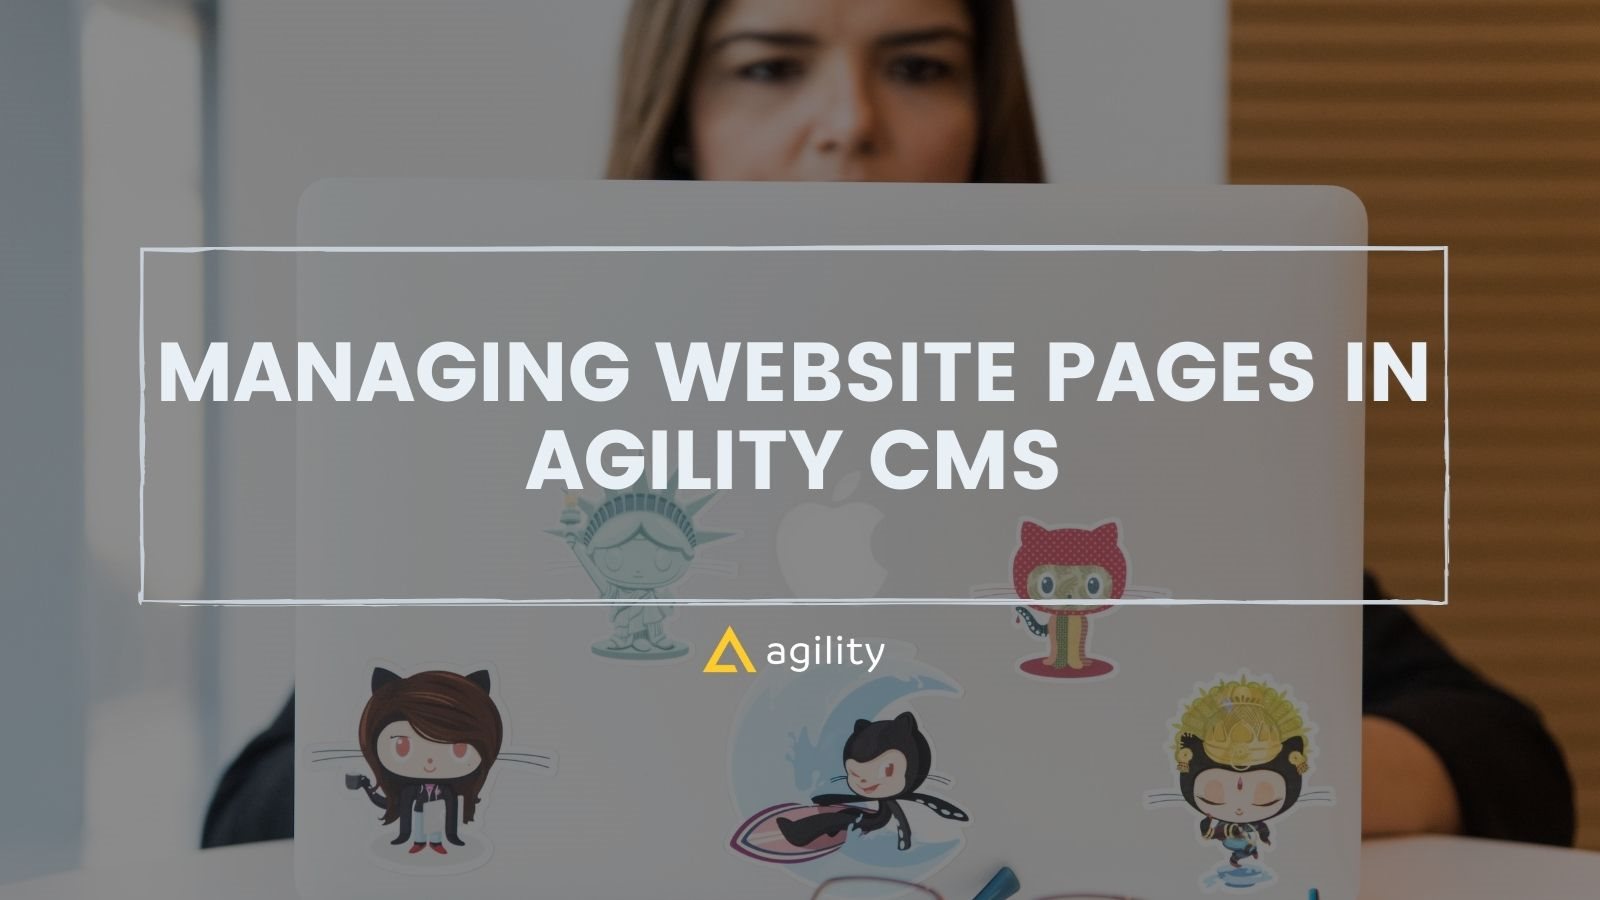 Managing Agility CMS web pages